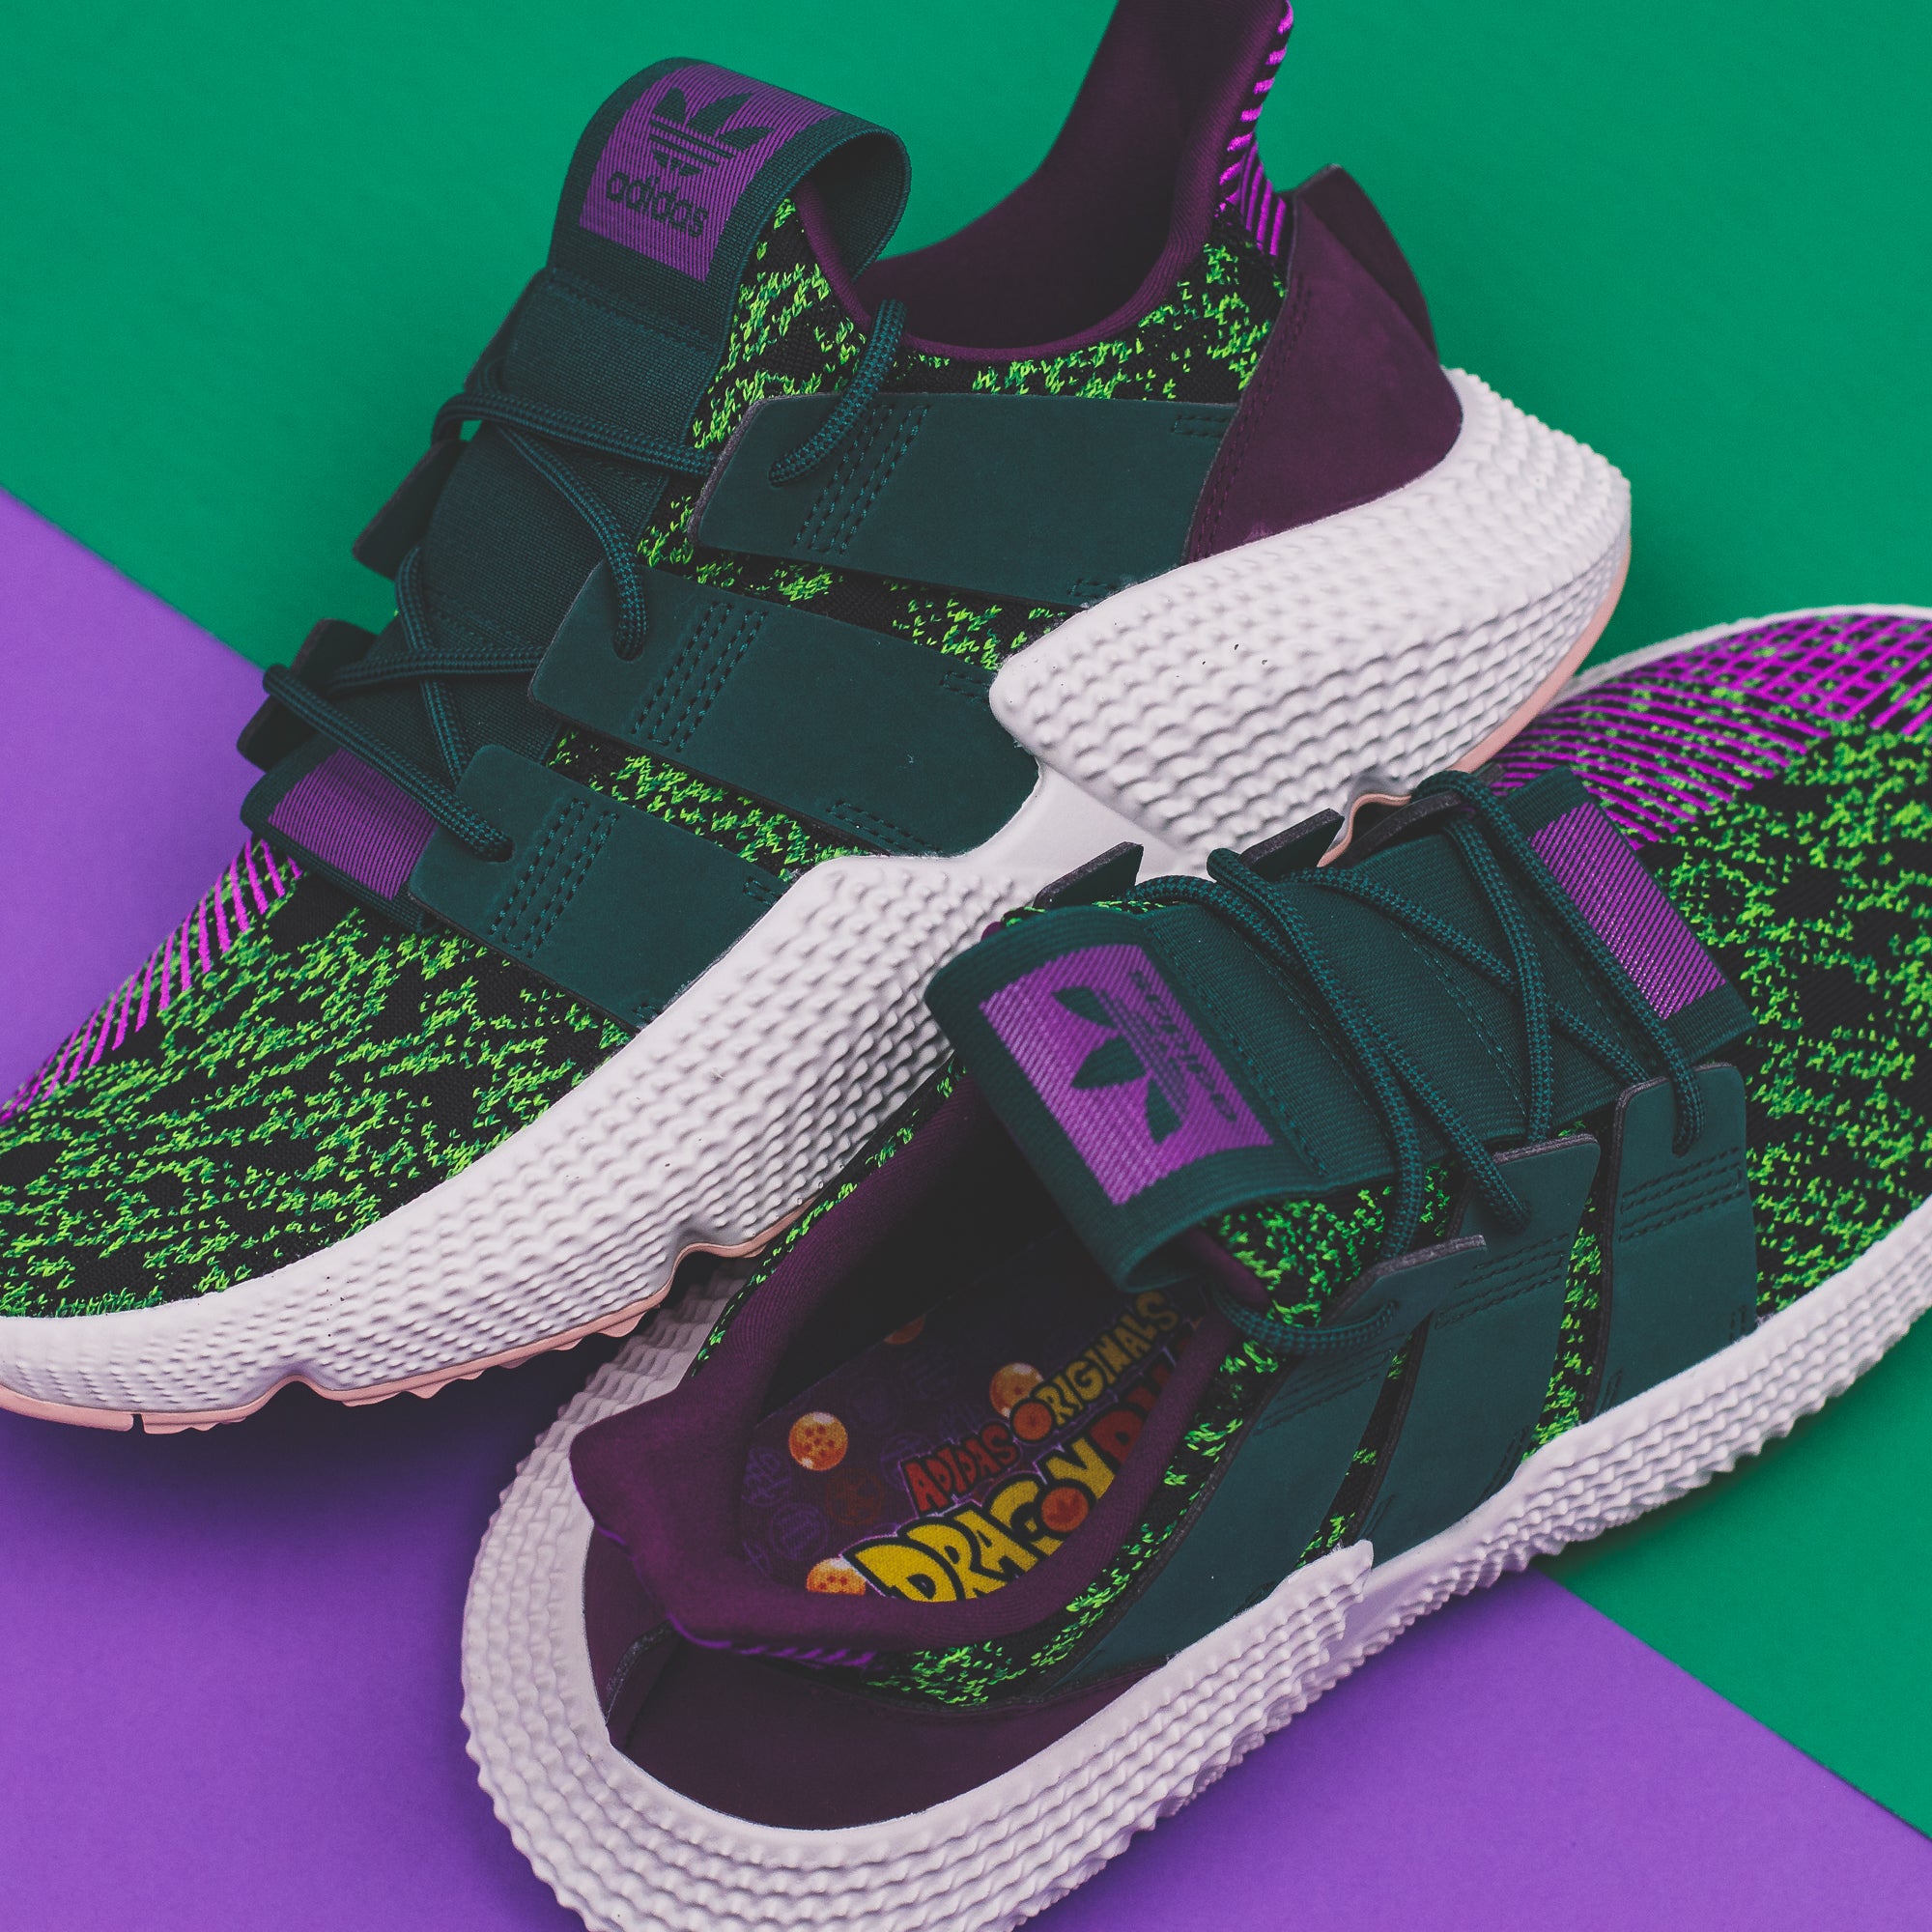 adidas cell prophere